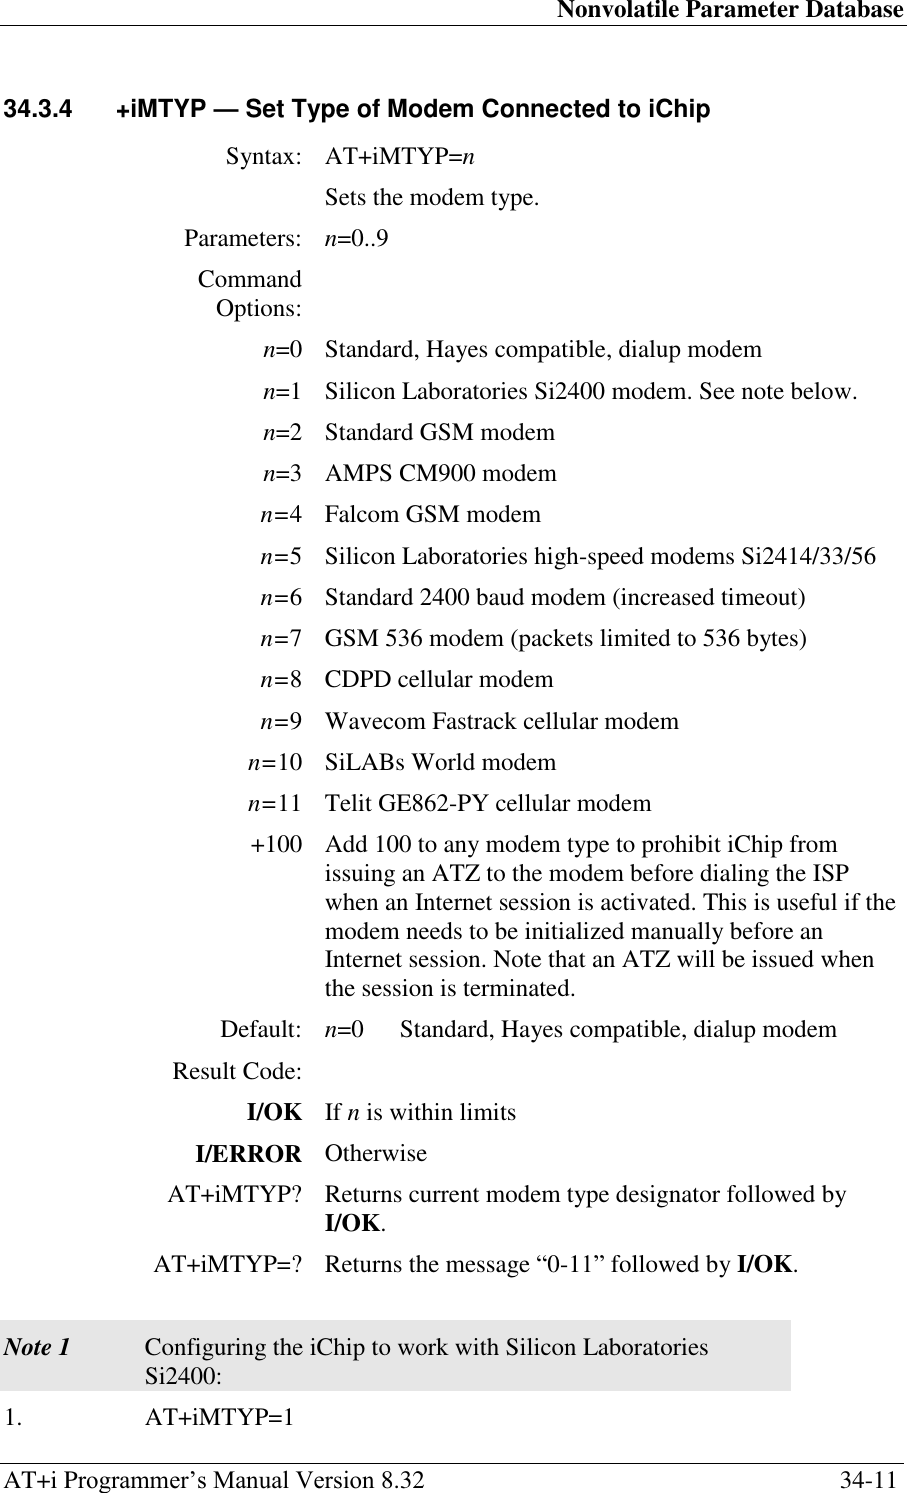 Nonvolatile Parameter Database AT+i Programmer‘s Manual Version 8.32  34-11 34.3.4  +iMTYP — Set Type of Modem Connected to iChip  Syntax: AT+iMTYP=n  Sets the modem type. Parameters: n=0..9 Command Options:  n=0 Standard, Hayes compatible, dialup modem n=1 Silicon Laboratories Si2400 modem. See note below. n=2 Standard GSM modem n=3 AMPS CM900 modem n=4 Falcom GSM modem n=5 Silicon Laboratories high-speed modems Si2414/33/56 n=6 Standard 2400 baud modem (increased timeout) n=7 GSM 536 modem (packets limited to 536 bytes) n=8 CDPD cellular modem n=9 Wavecom Fastrack cellular modem n=10 SiLABs World modem n=11 Telit GE862-PY cellular modem +100 Add 100 to any modem type to prohibit iChip from issuing an ATZ to the modem before dialing the ISP when an Internet session is activated. This is useful if the modem needs to be initialized manually before an Internet session. Note that an ATZ will be issued when the session is terminated. Default: n=0  Standard, Hayes compatible, dialup modem Result Code:  I/OK If n is within limits I/ERROR Otherwise AT+iMTYP? Returns current modem type designator followed by I/OK. AT+iMTYP=? Returns the message ―0-11‖ followed by I/OK.   Note 1 Configuring the iChip to work with Silicon Laboratories Si2400: 1. AT+iMTYP=1 